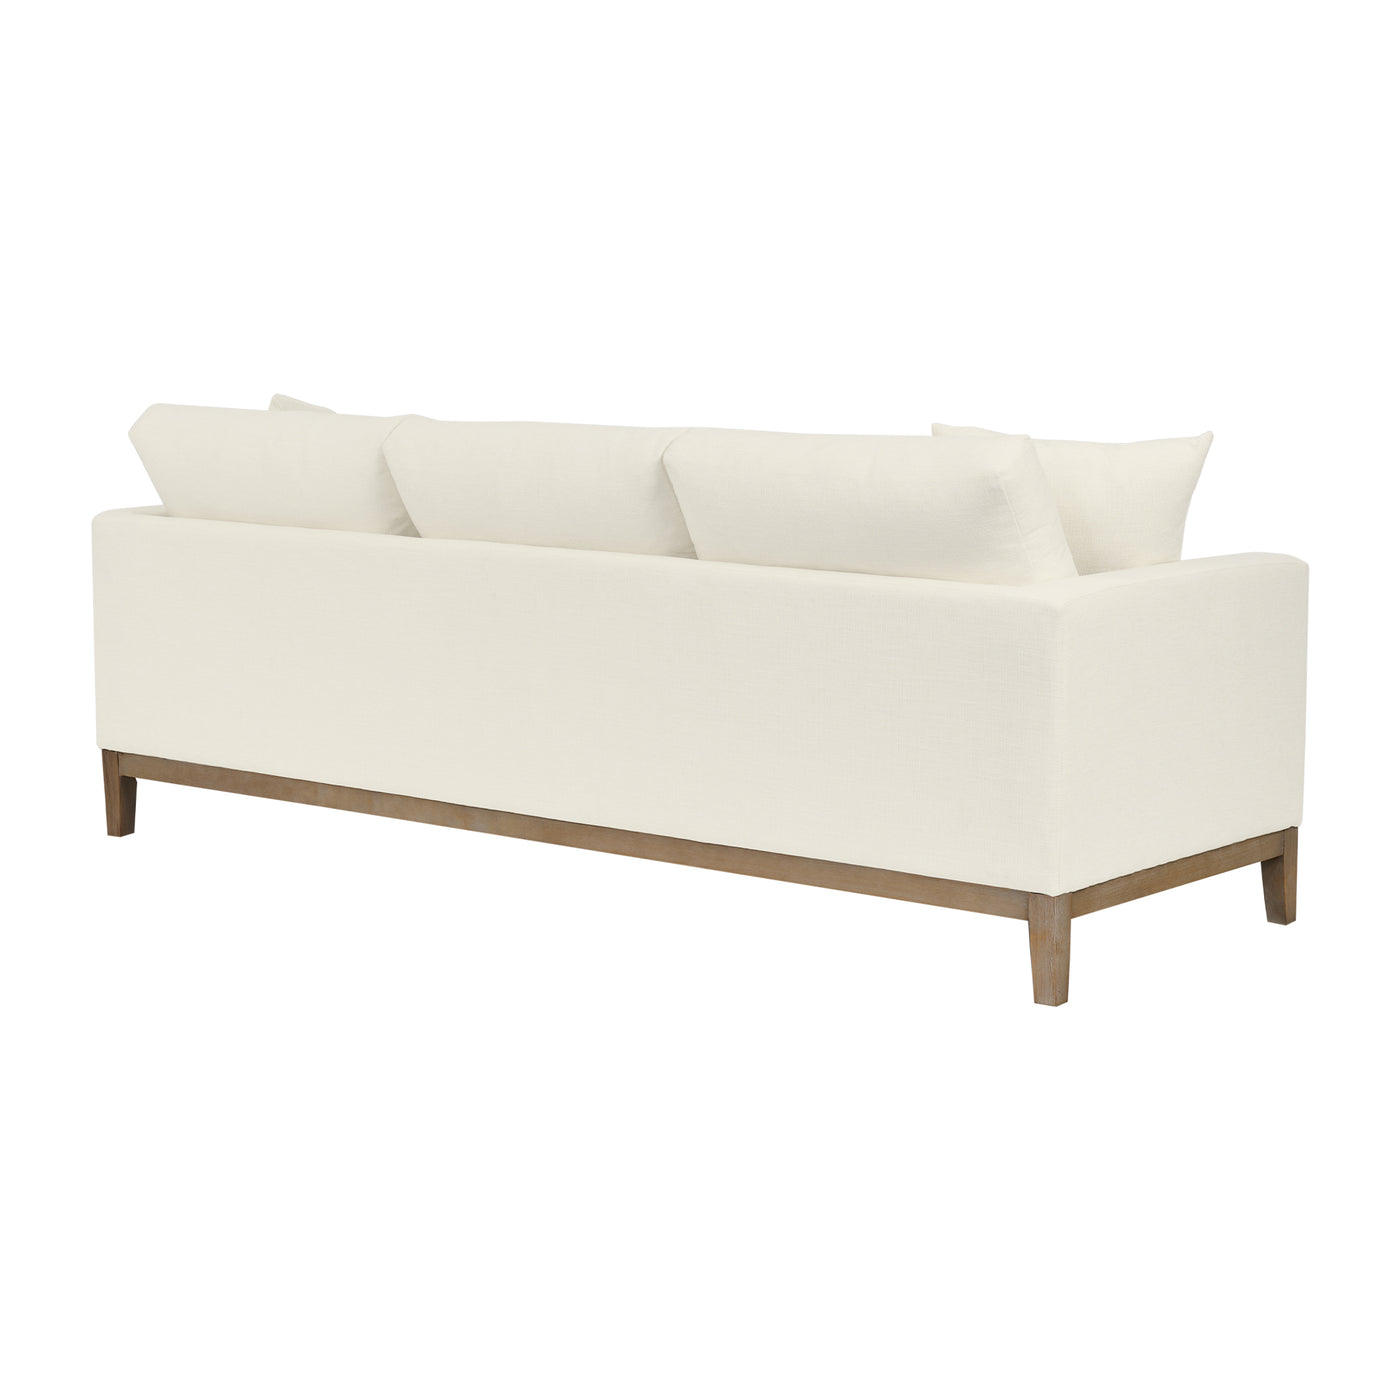 Donna 93 in. Upholstered Sofa